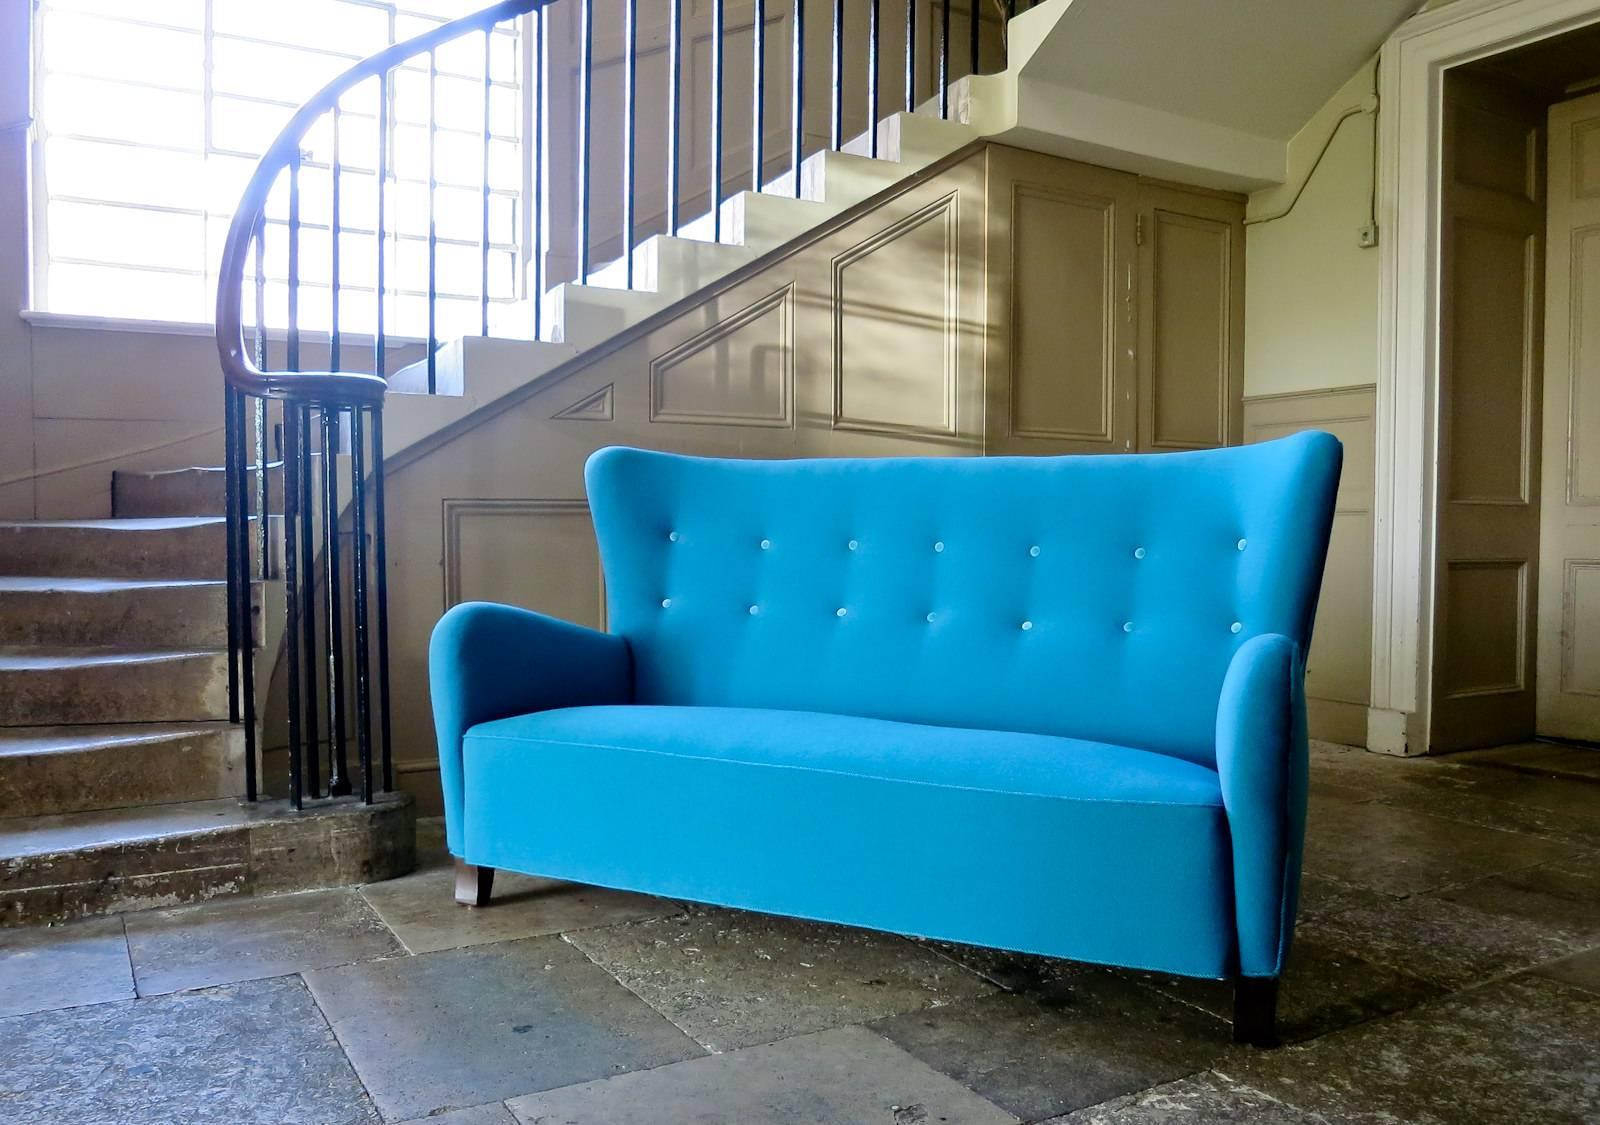 A beautifully designed high back Danish sofa dating from the 1940s. Delicate soft organic curves and lines to this piece, in a rare high back design. Newly upholstered in teal blue wool upholstery with velvet buttons and teal trimmings, all in an